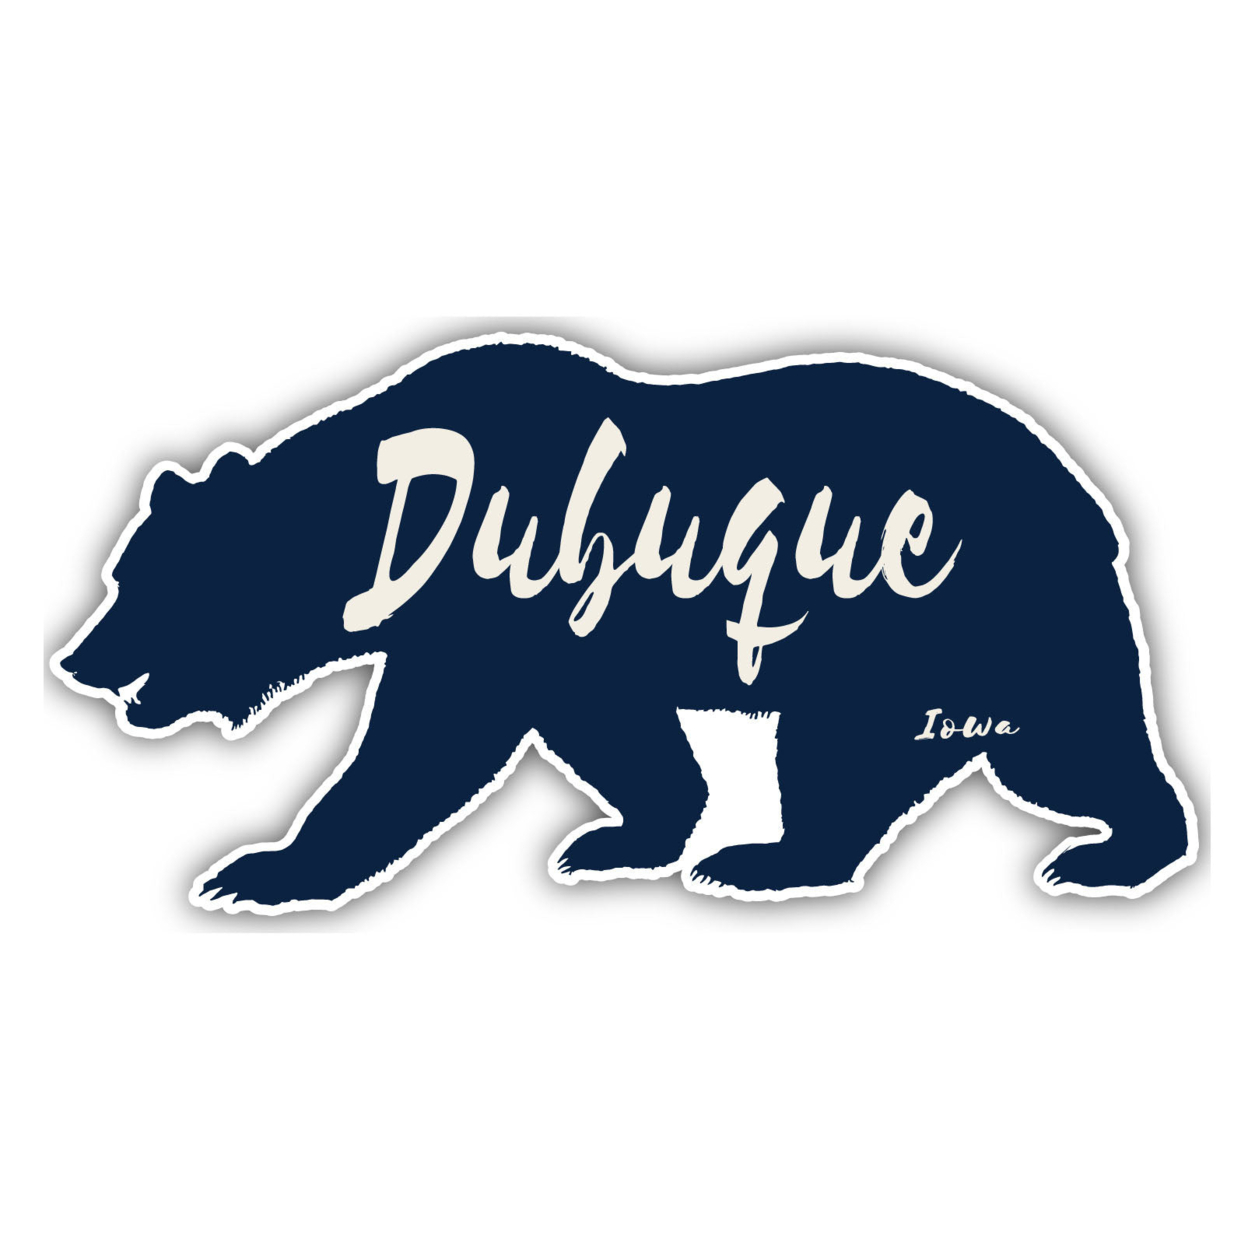 Dubuque Iowa Souvenir Decorative Stickers (Choose Theme And Size) - 4-Pack, 2-Inch, Great Outdoors